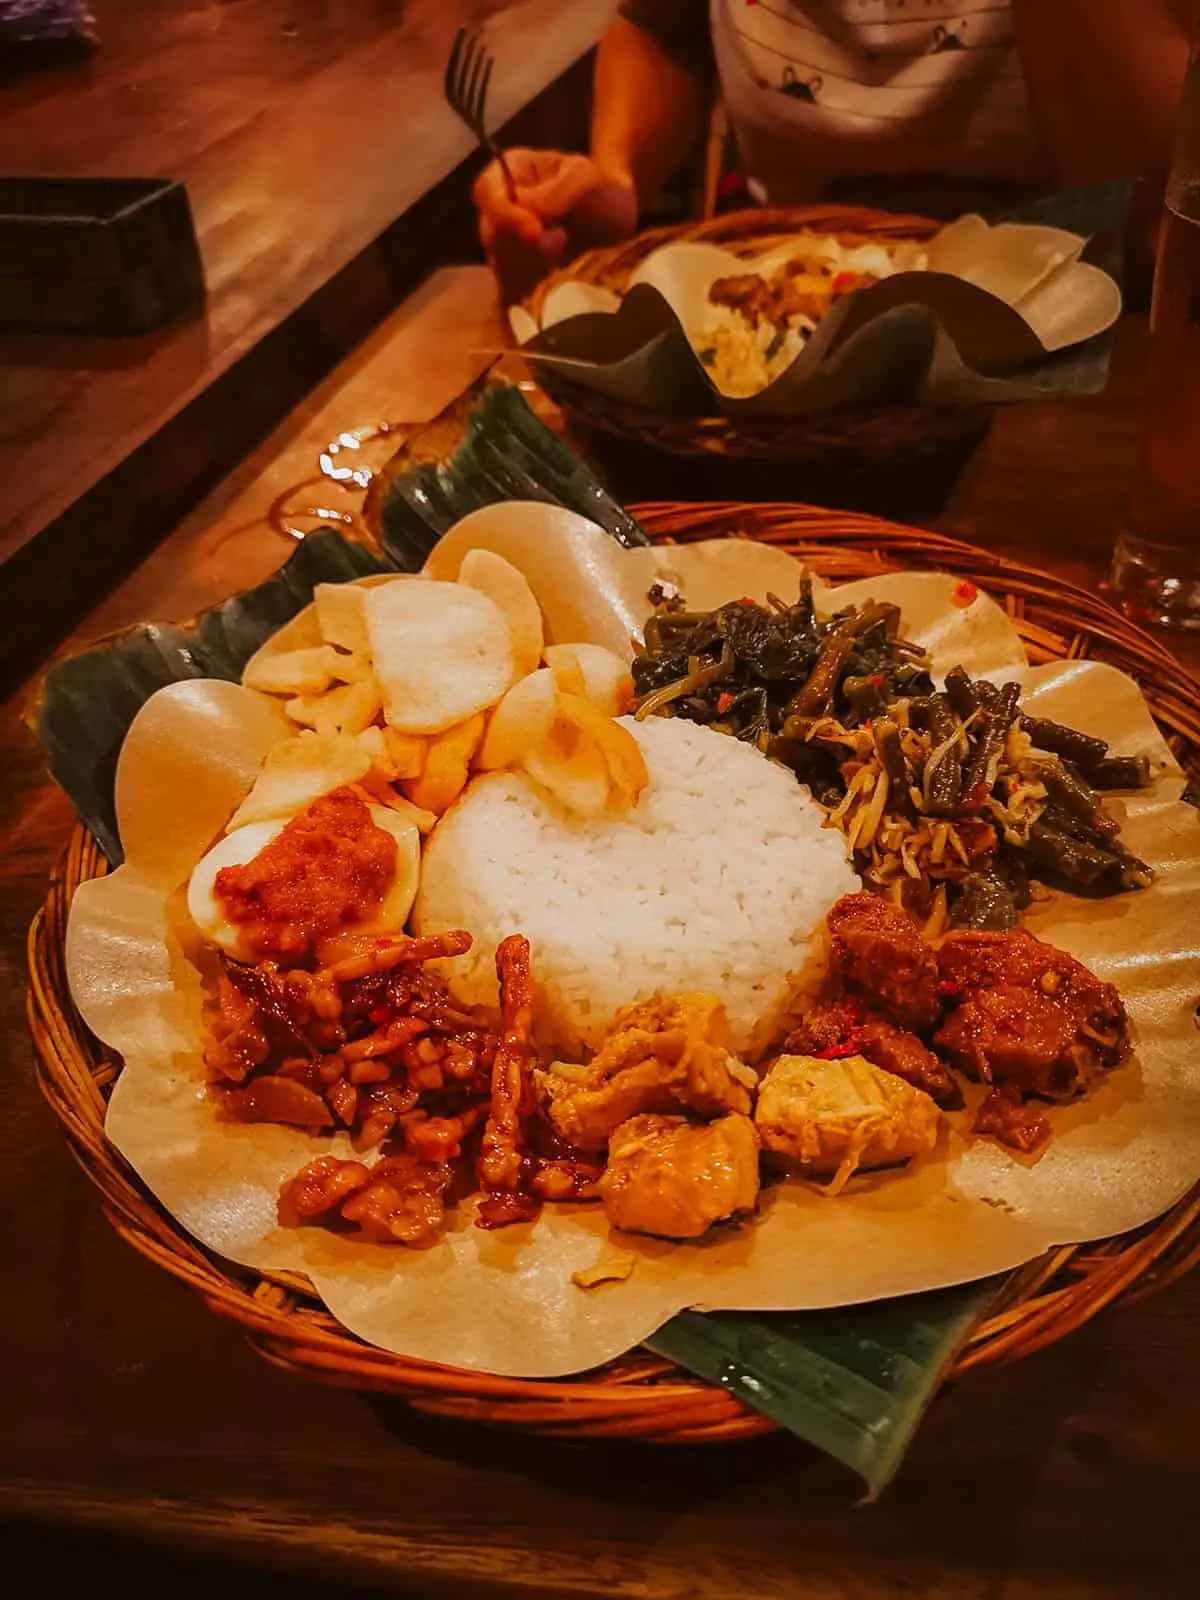 Nasi campur from a popular Indonesian restaurant in Bali